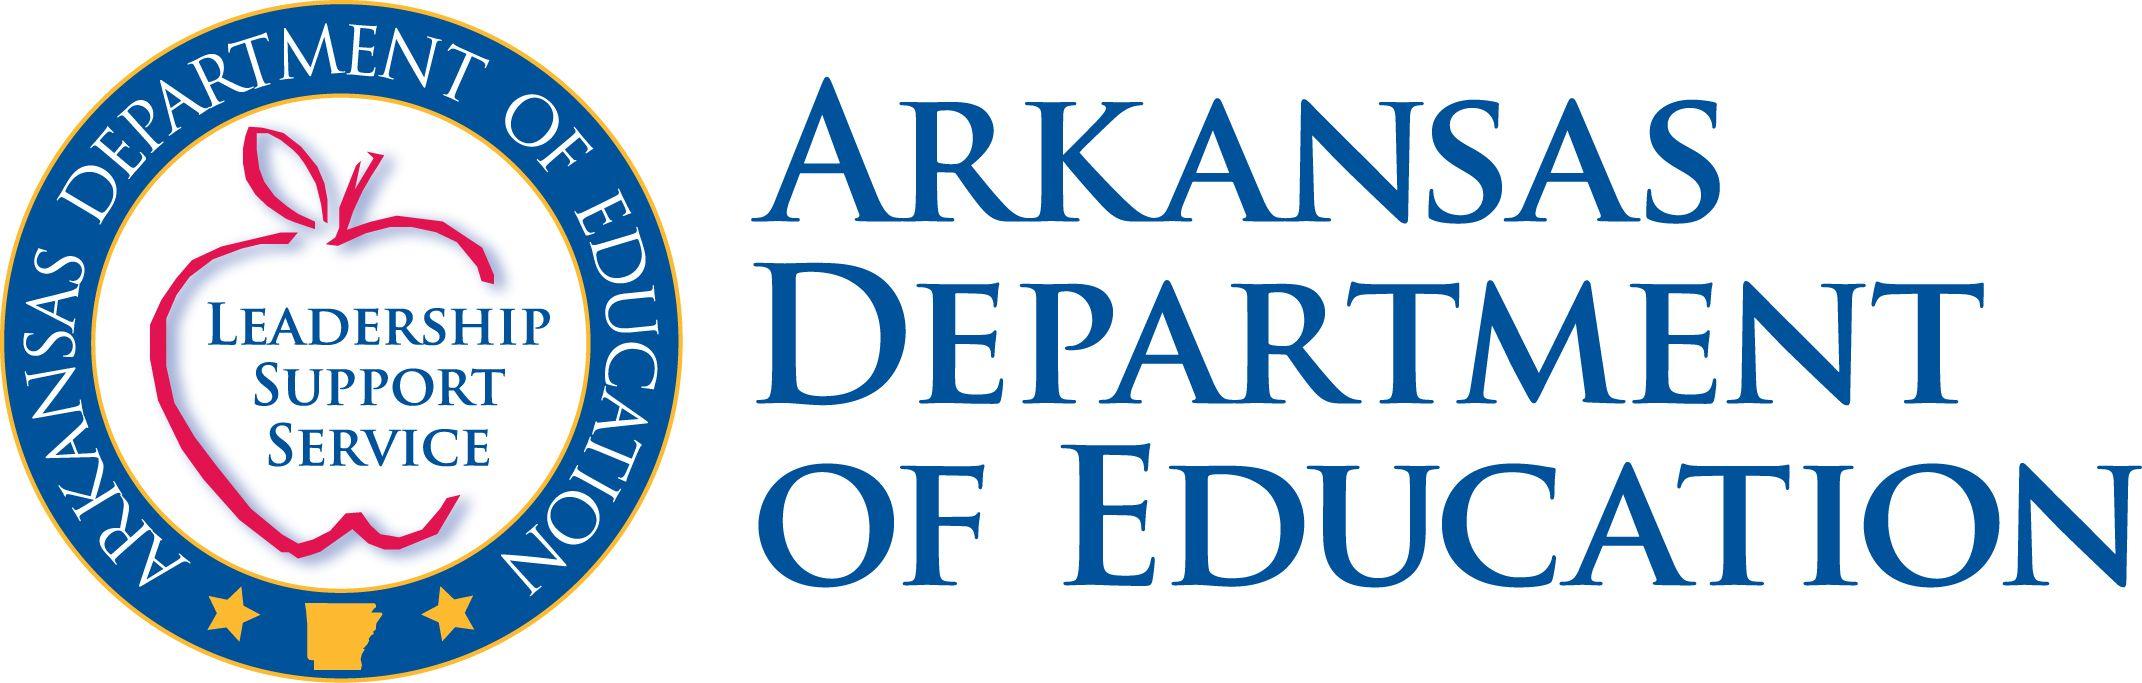 Us Department of Education Logo - State Board of Education. Arkansas Department of Education